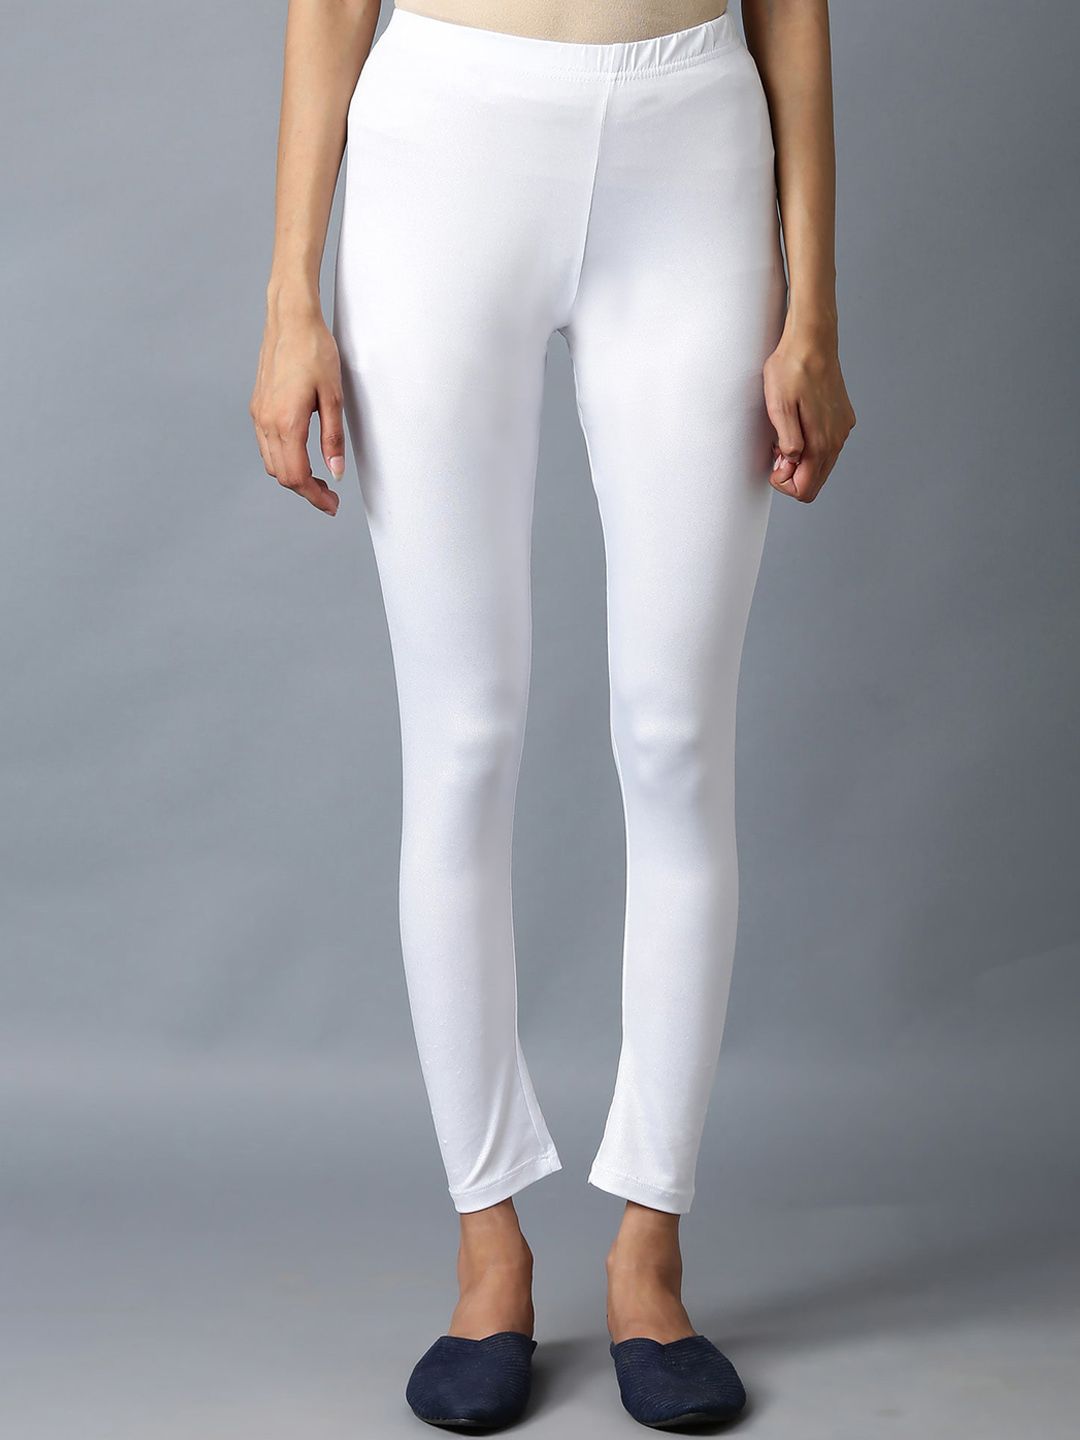 elleven Women White Solid Ankle Length Leggings Price in India